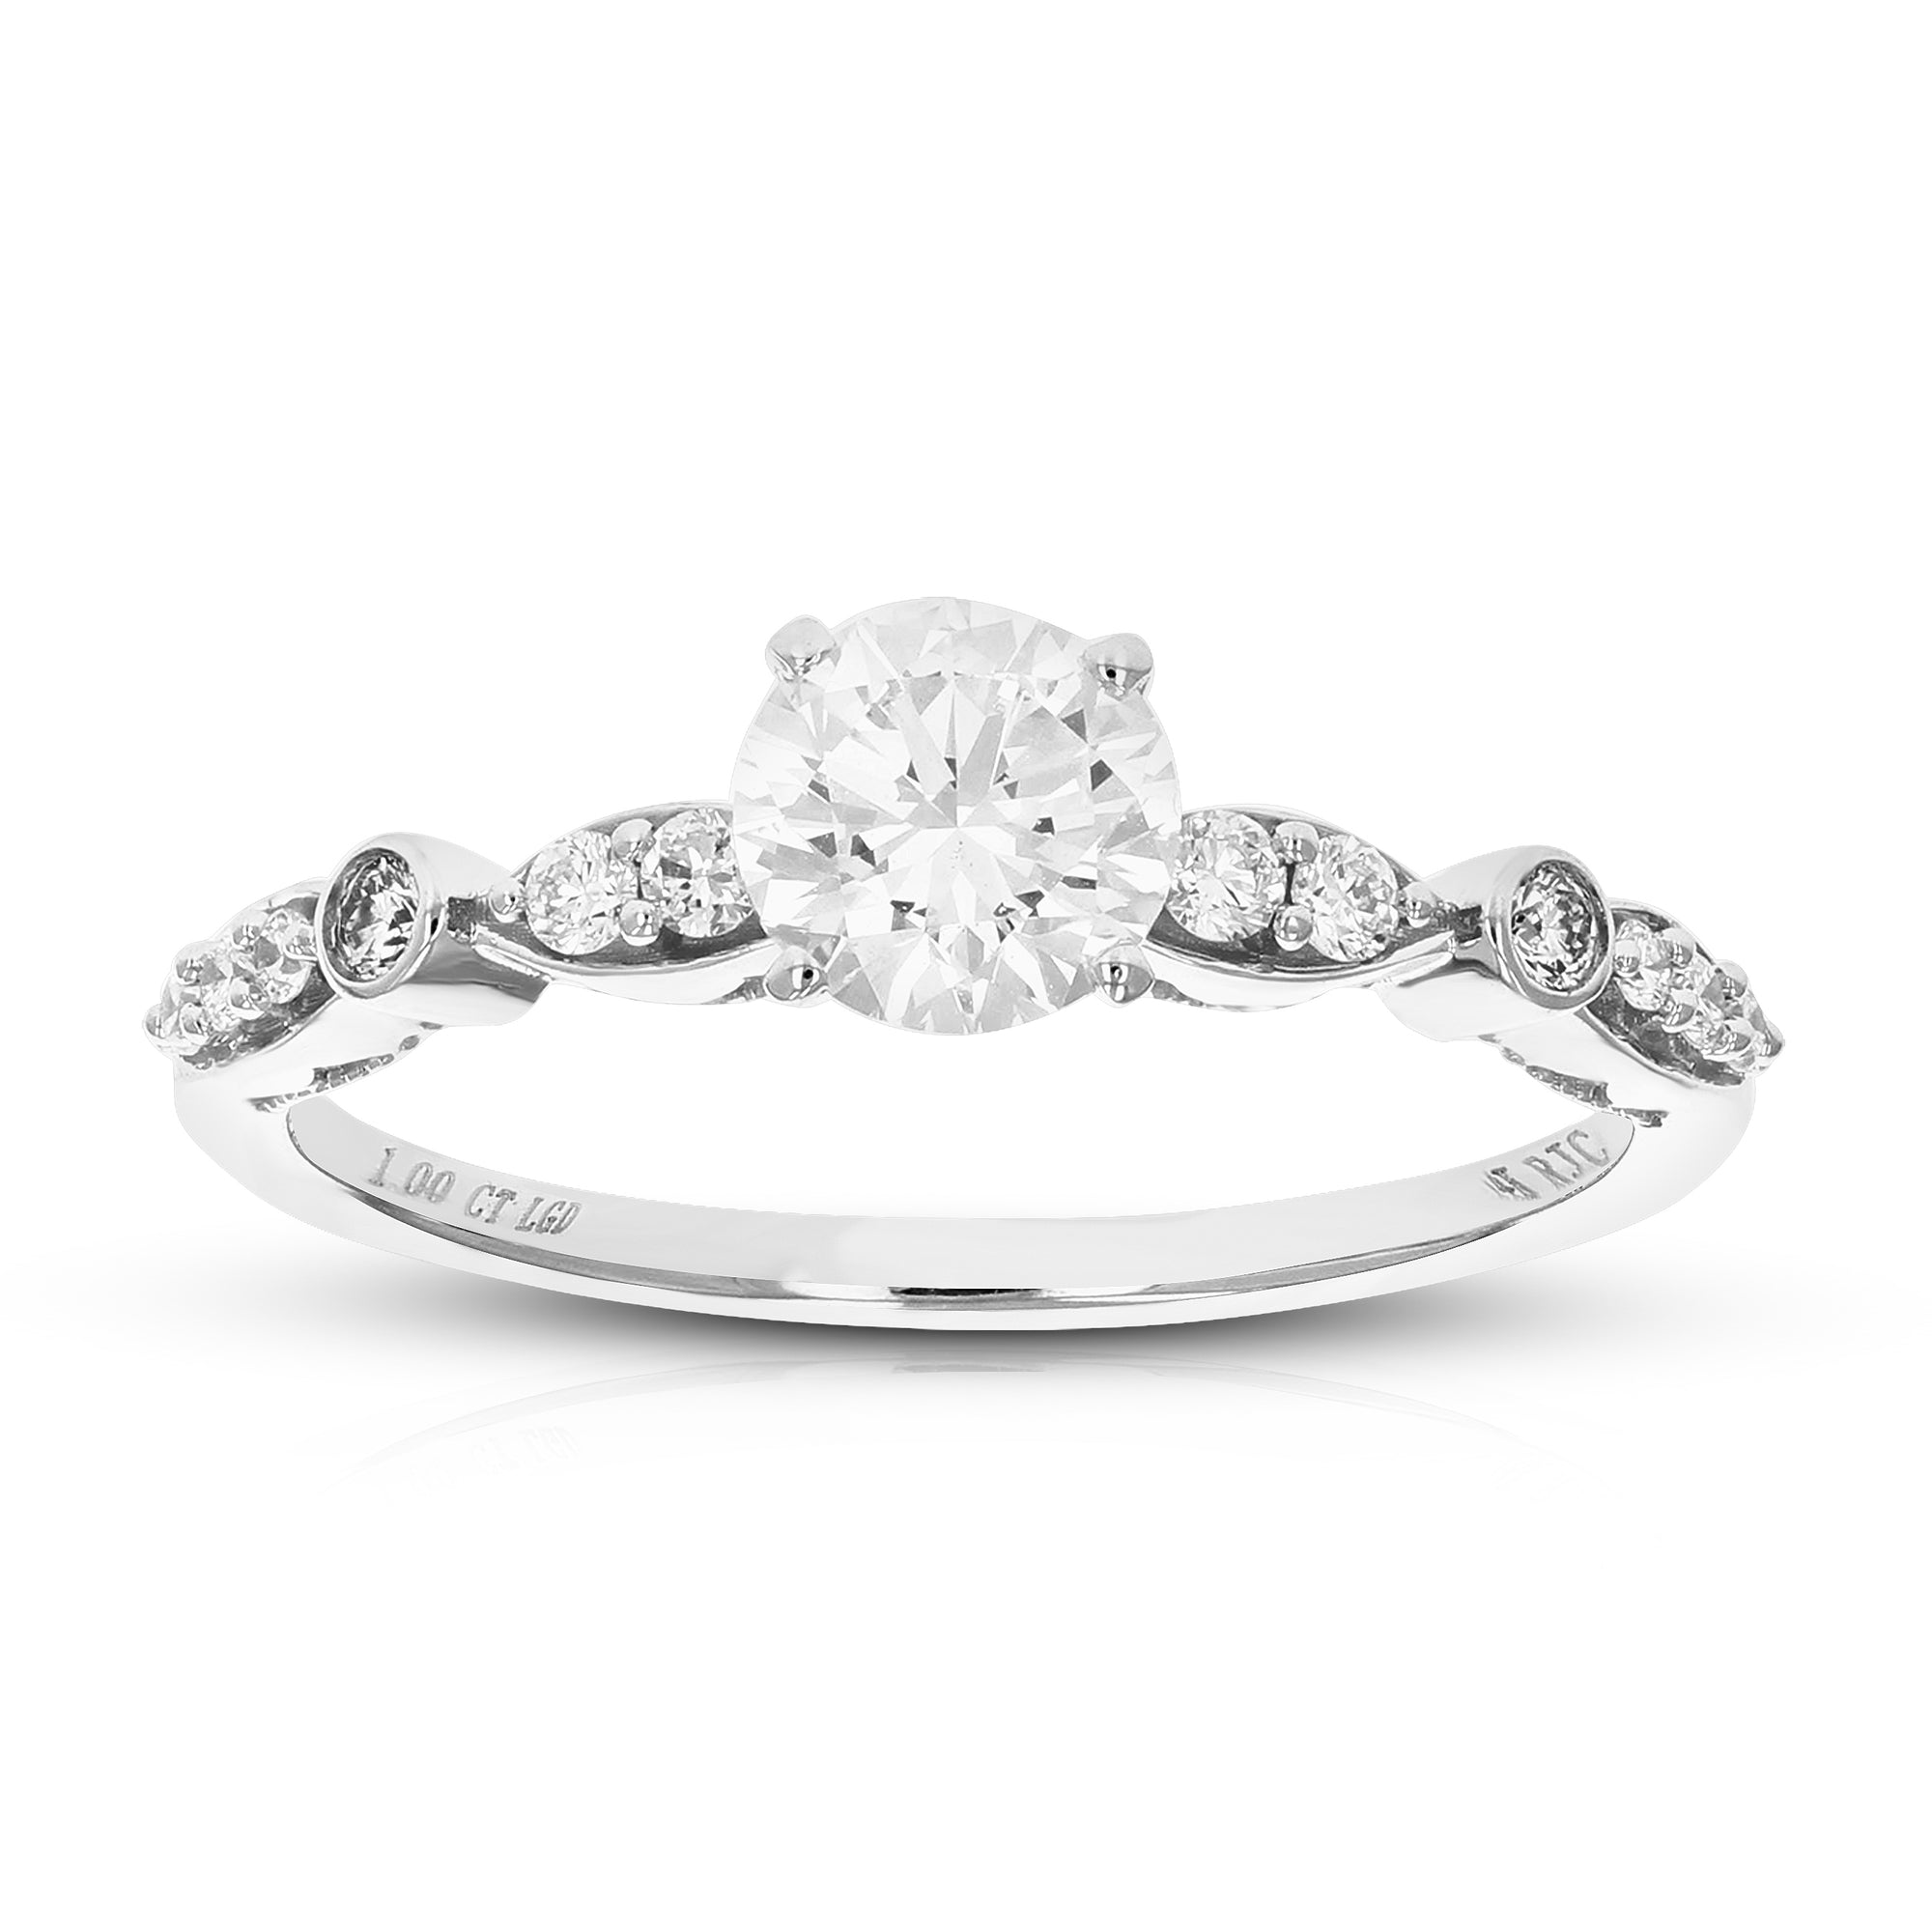 1 cttw Round Lab Grown Diamond Engagement Ring 13 Stones 14K White Gold Prong Set 3/4 Inch